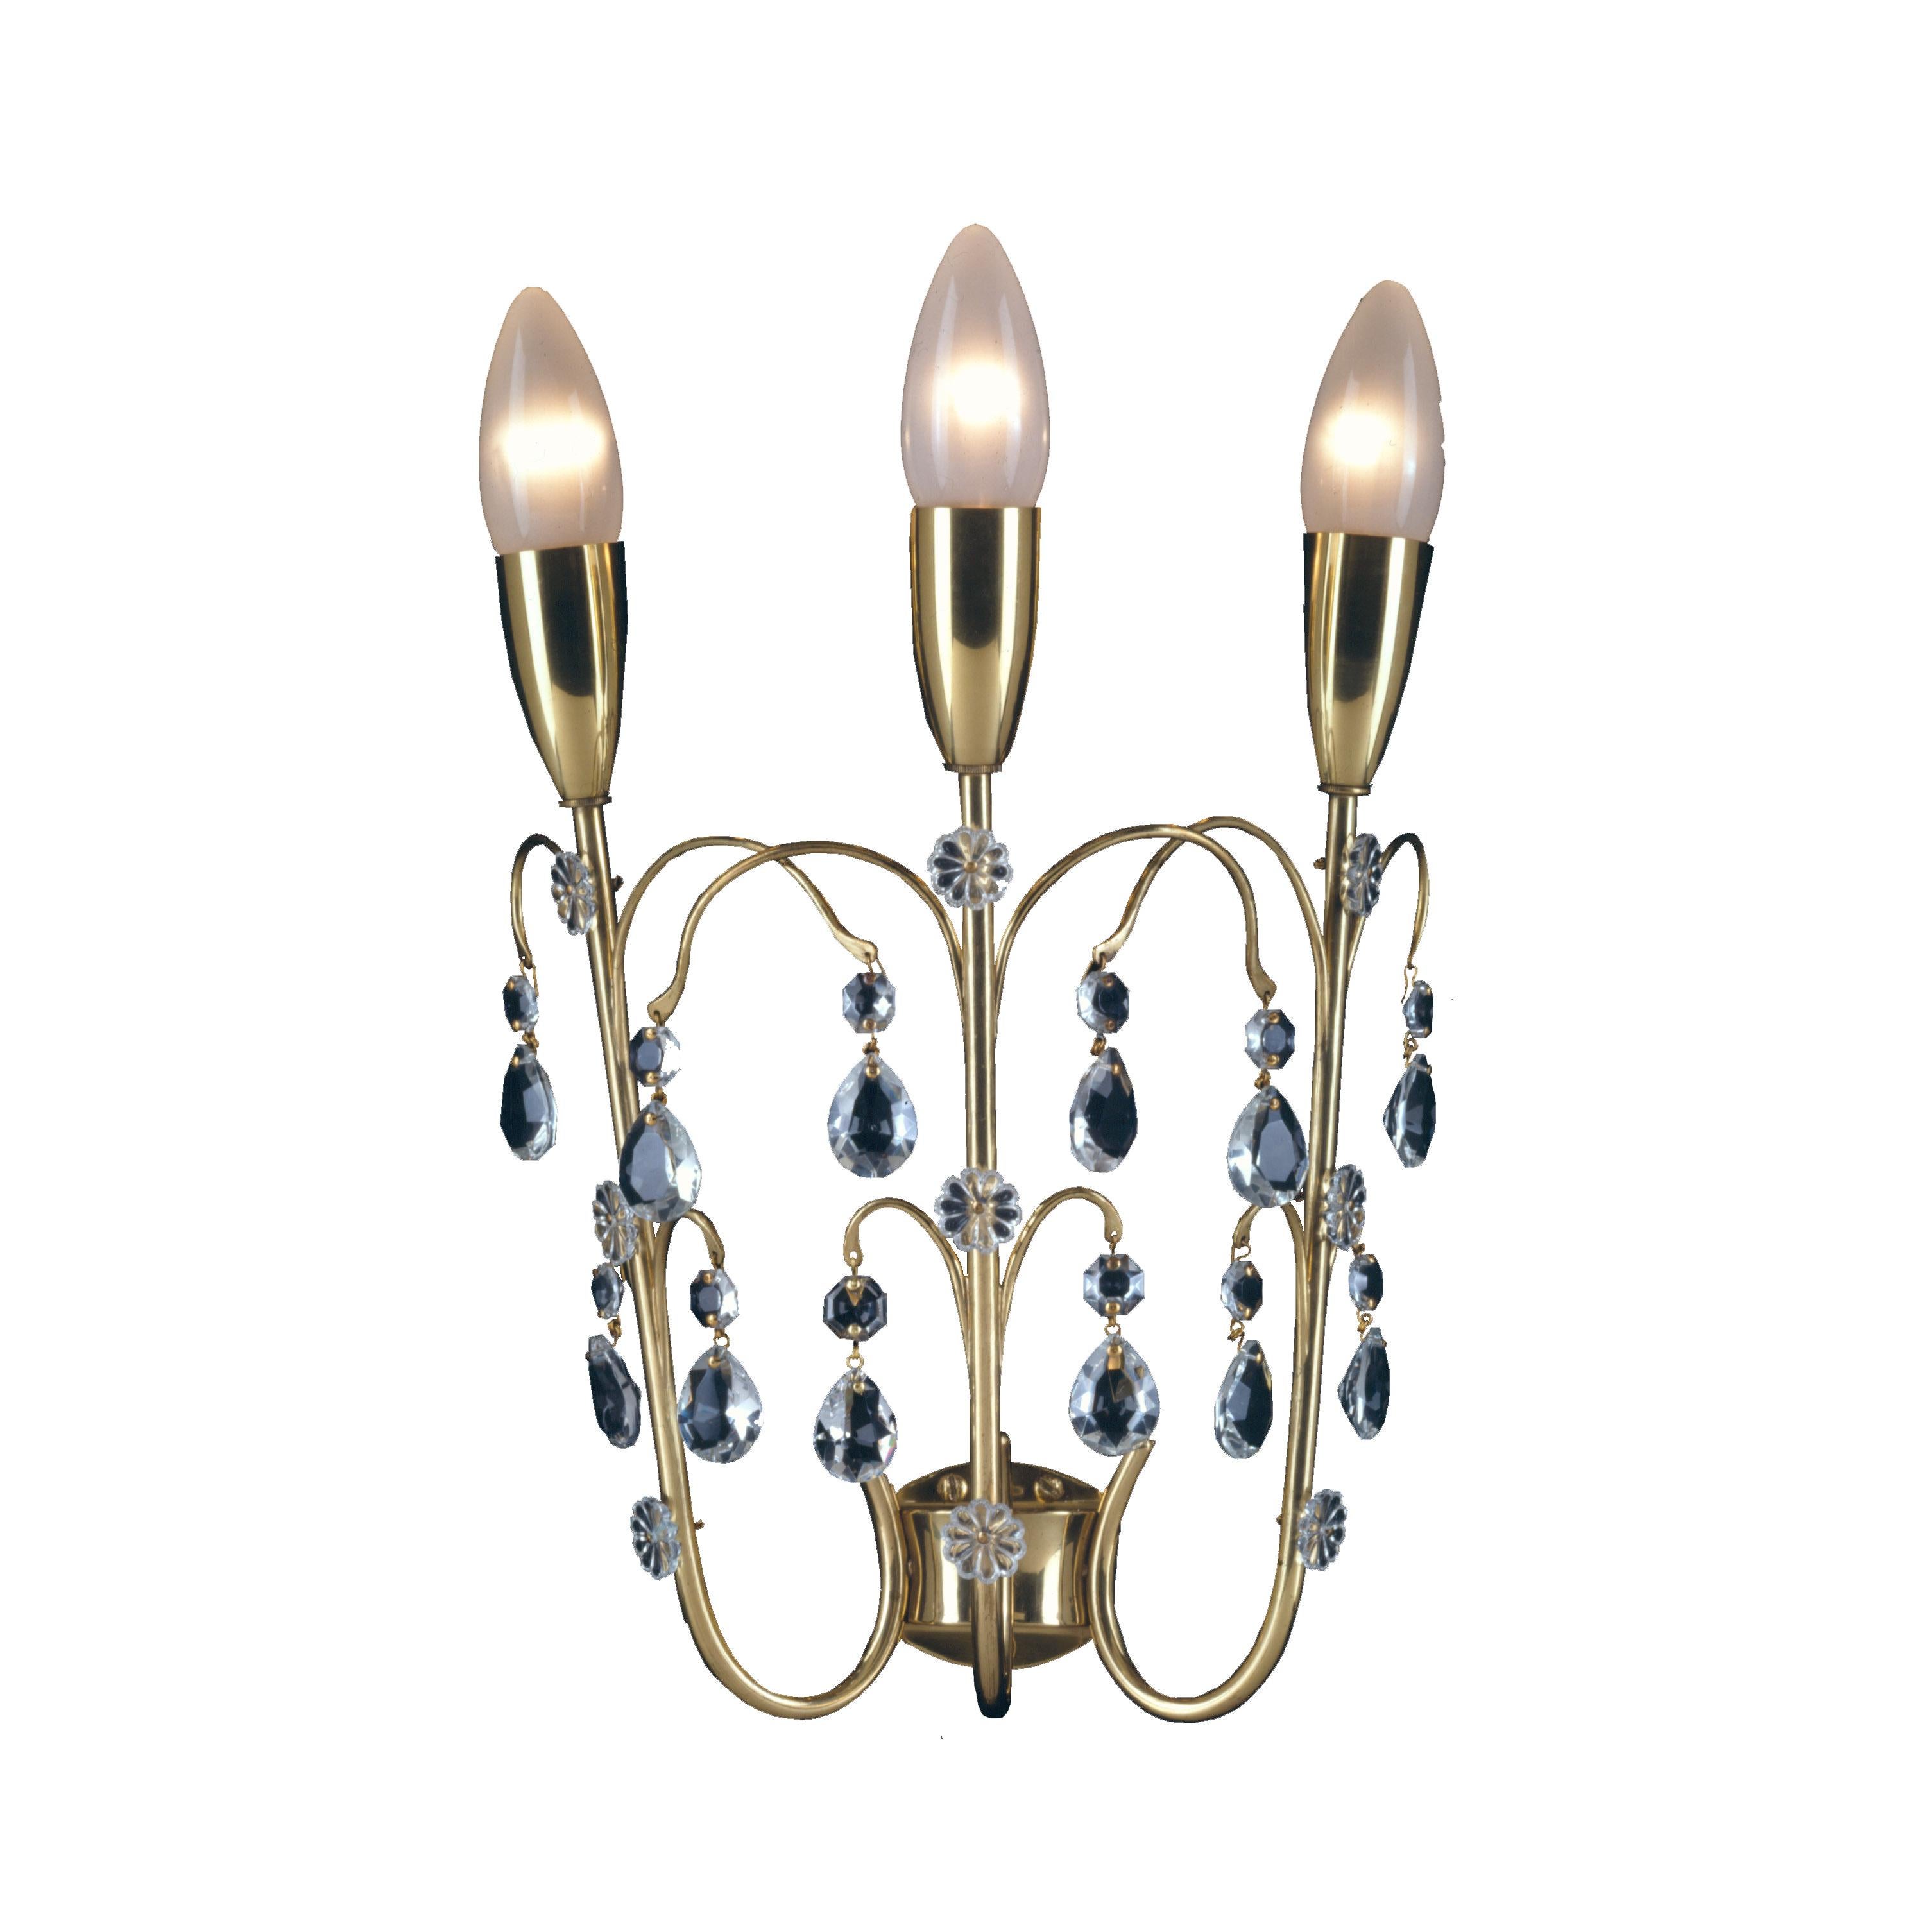 Hand-Crafted Mid-Century Modern Brass and Crystal Glass Wall Light Sconce, Re Edition For Sale